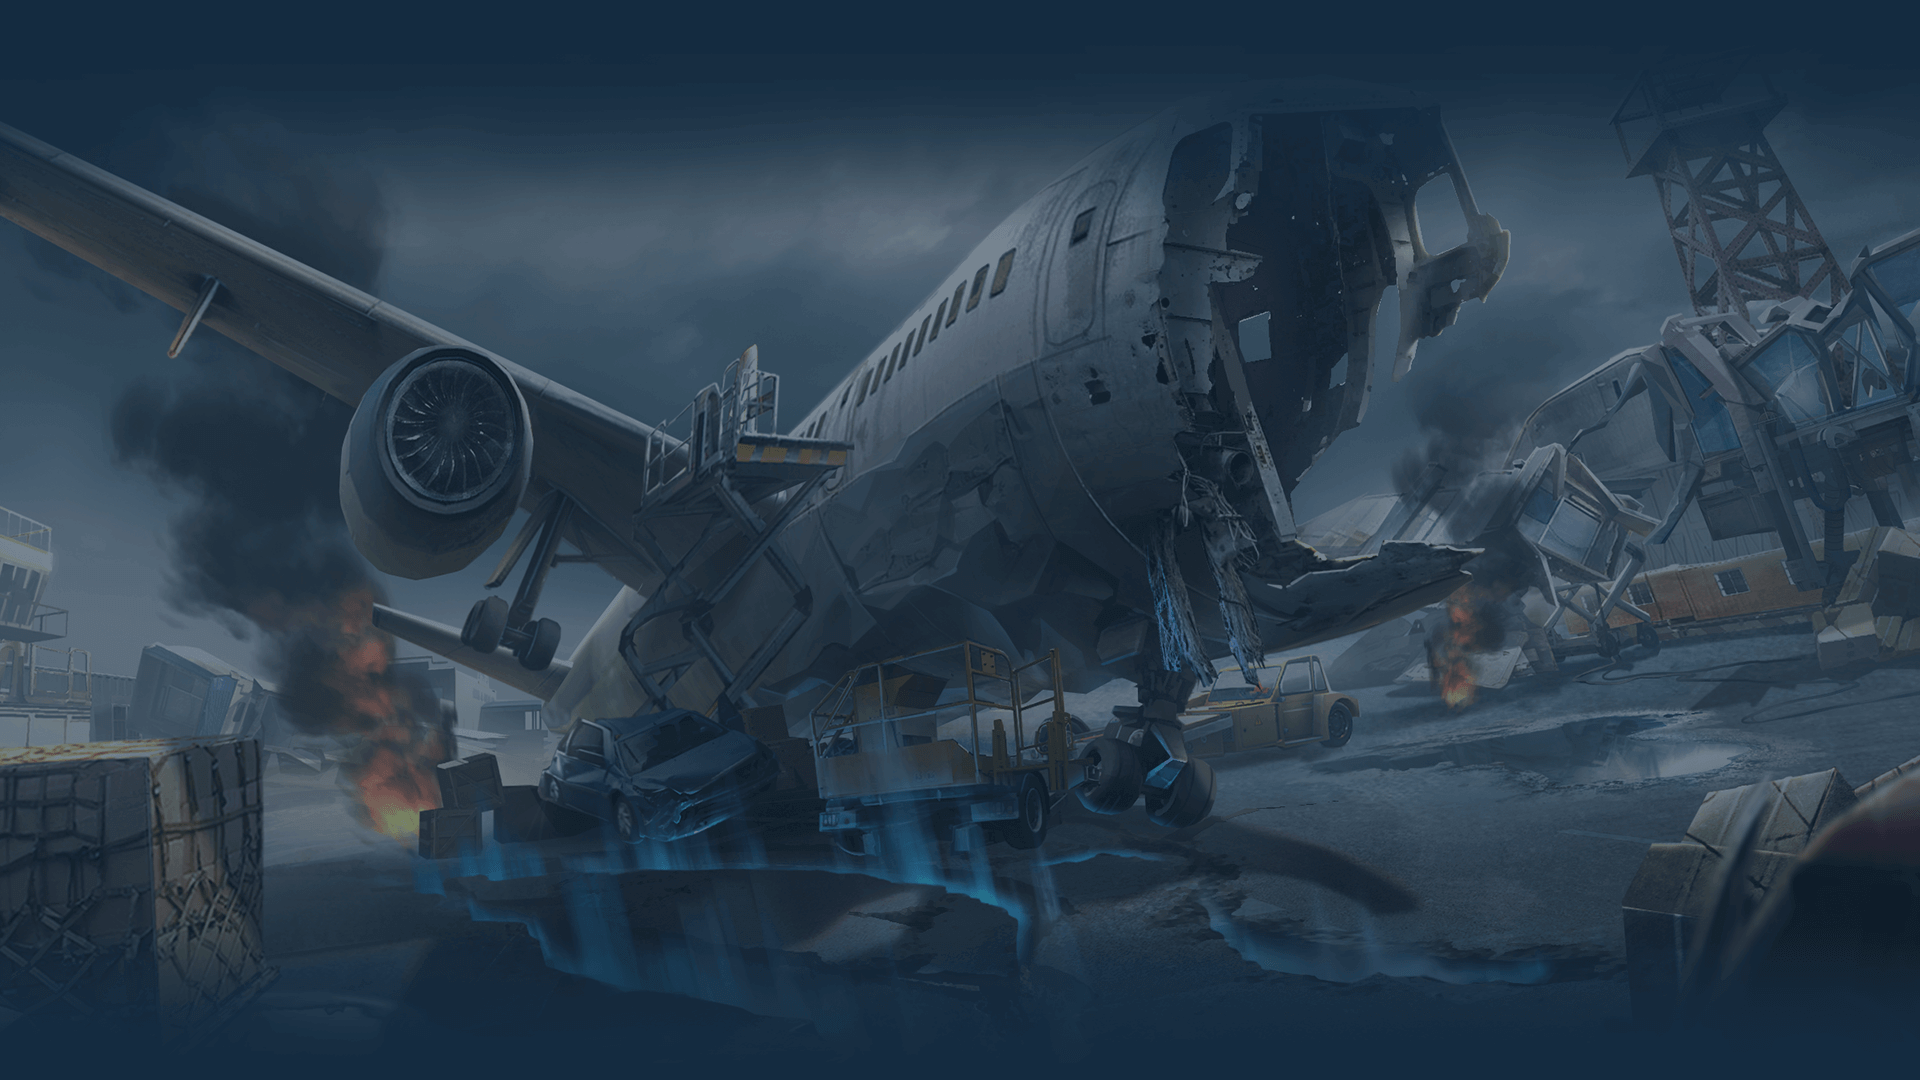 Wallpaper Lost in blue, game wreck plane